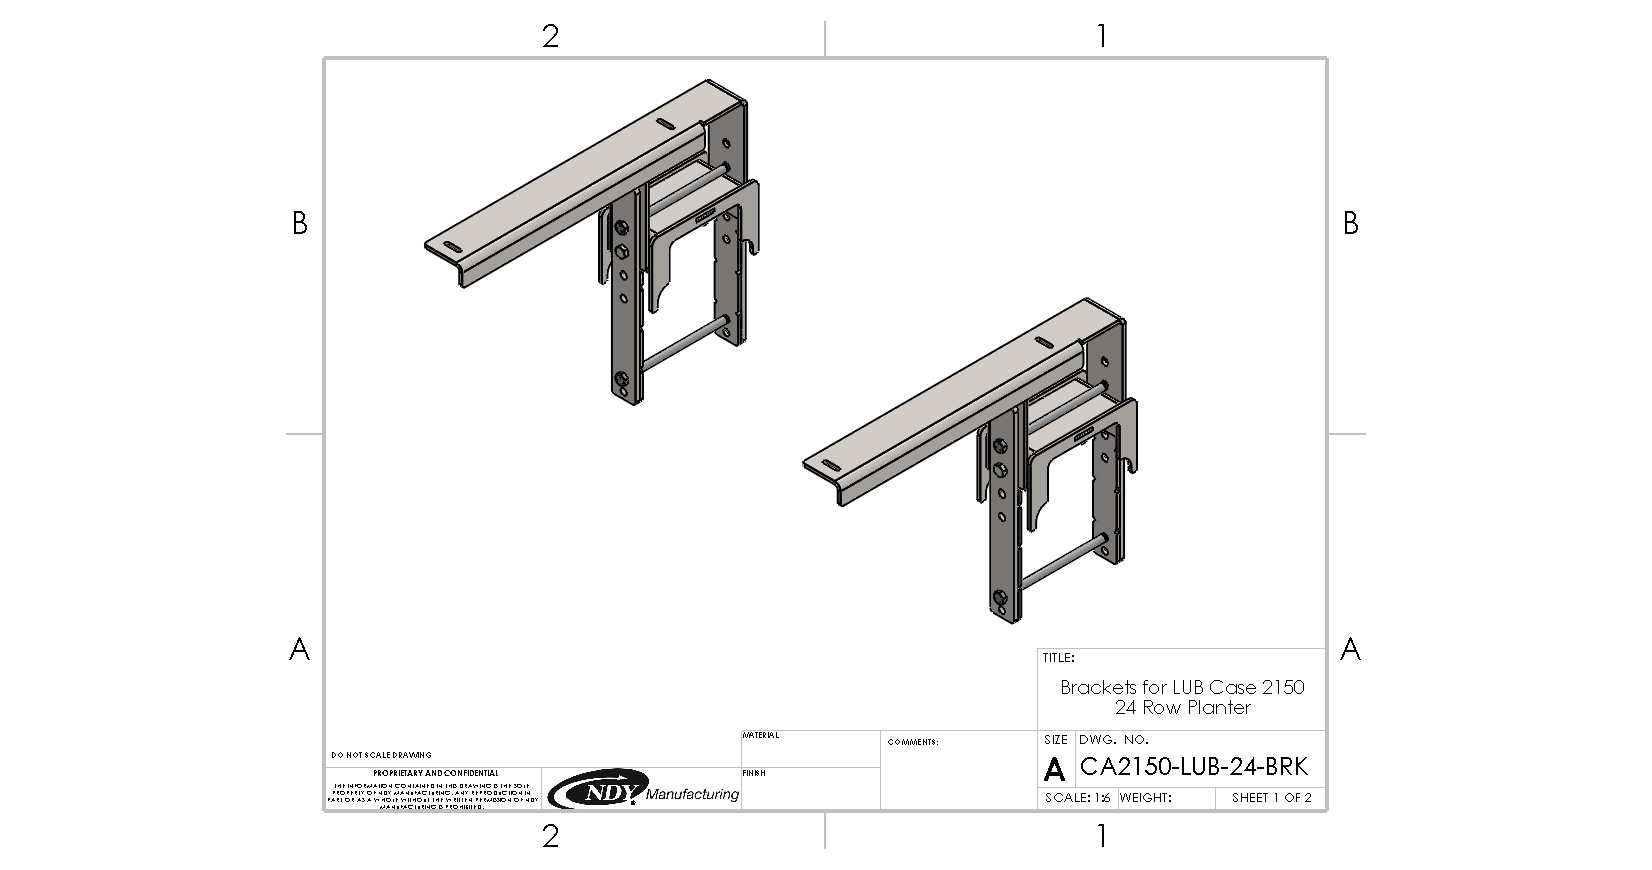 A drawing of Large Utility Storage Box Brackets for 24 row 30" Case IH 2150 Planters.